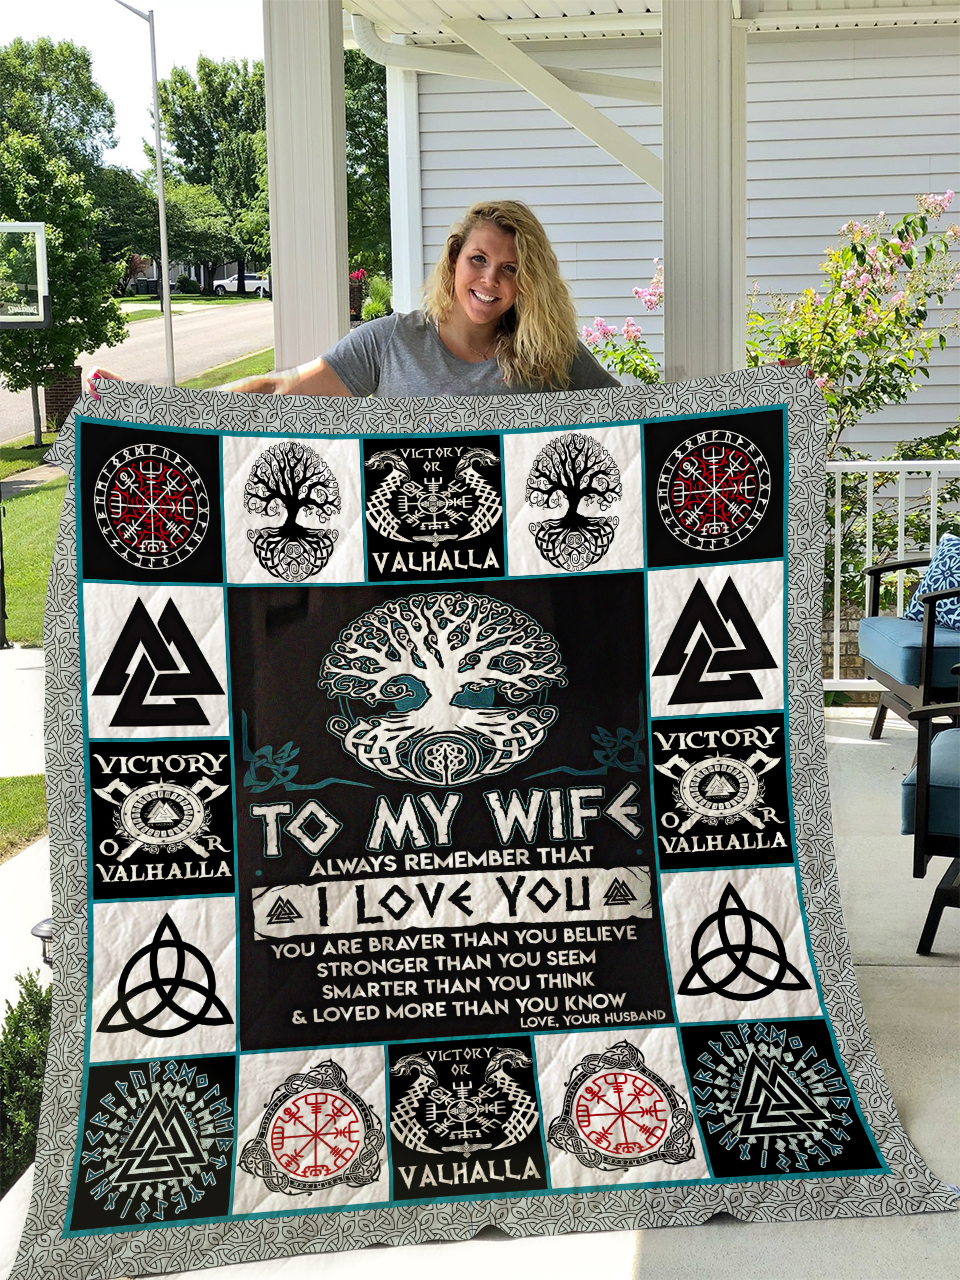 To My Wife Quilt Blanket 